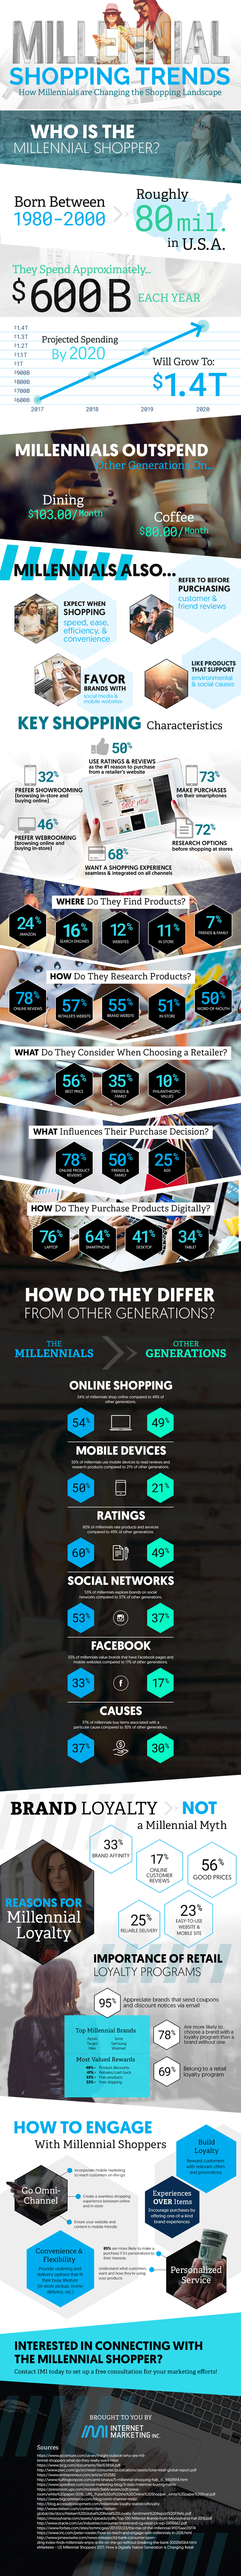 How to Position a Product or Service with Millennials